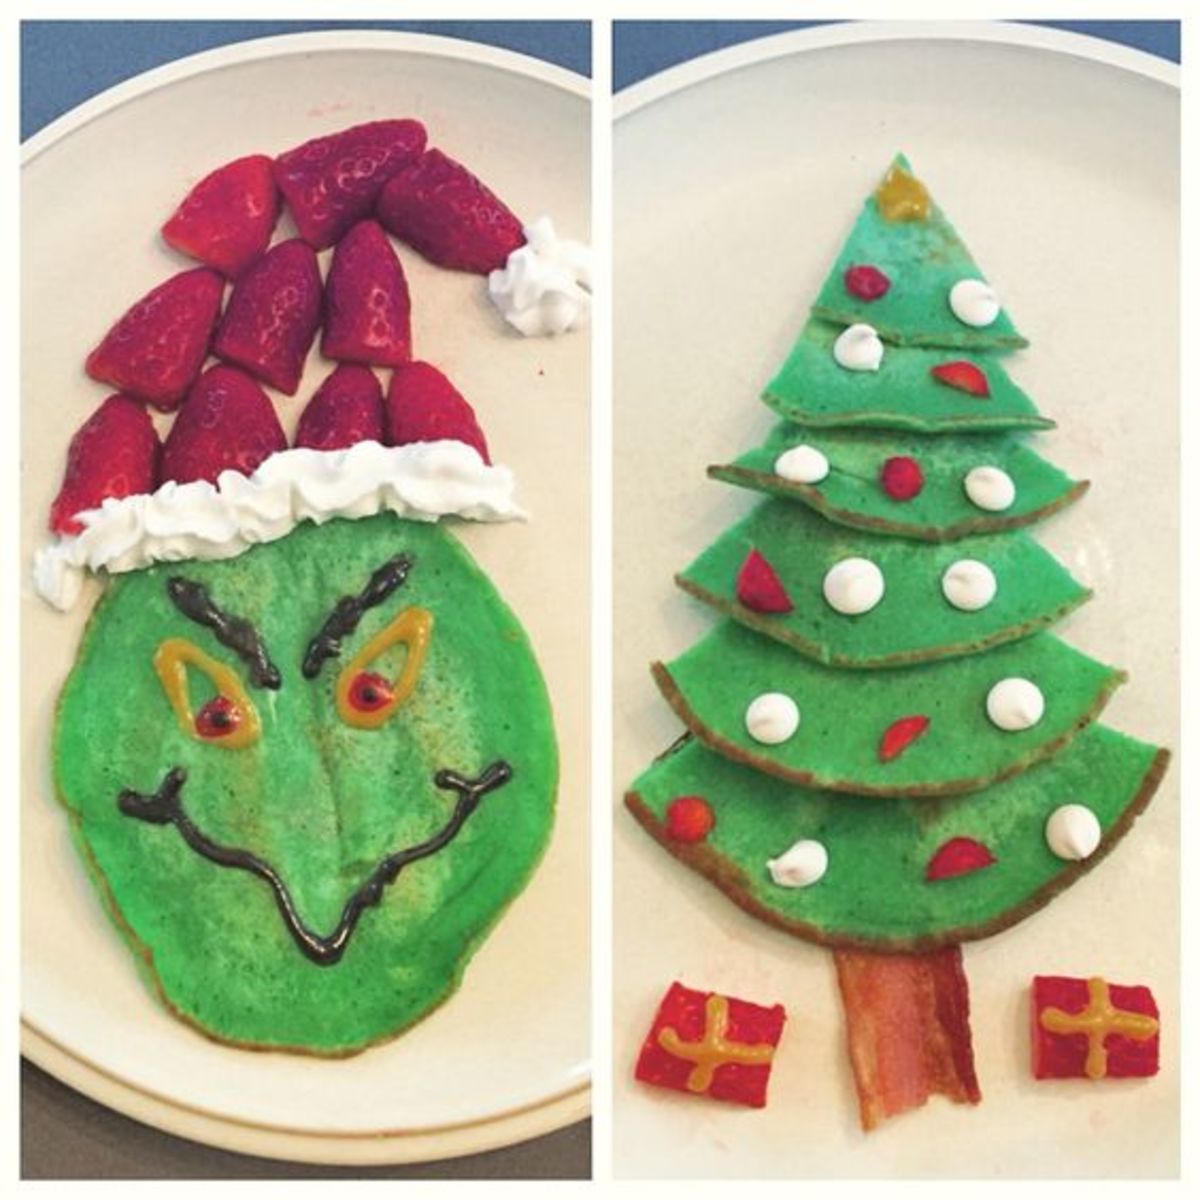 Grinch and Christmas tree pancakes 